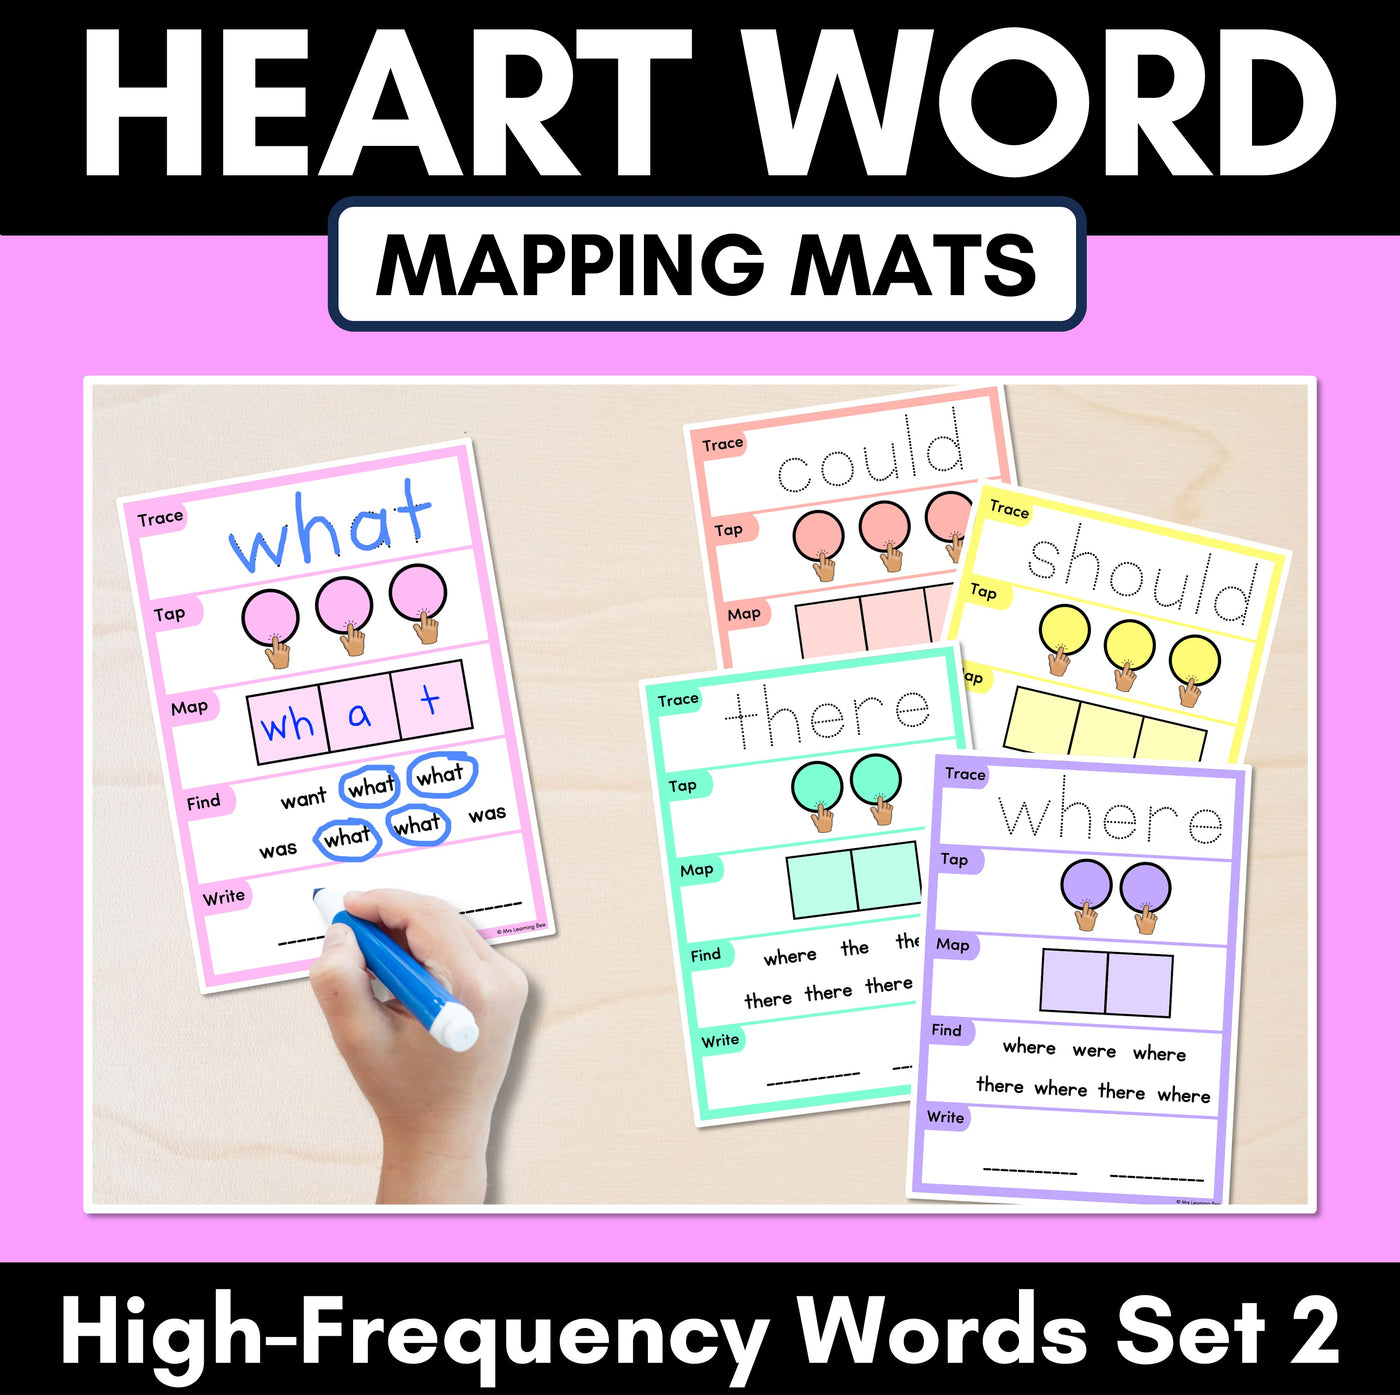 HEART WORD MAPPING MATS - High-Frequency Words Set 2